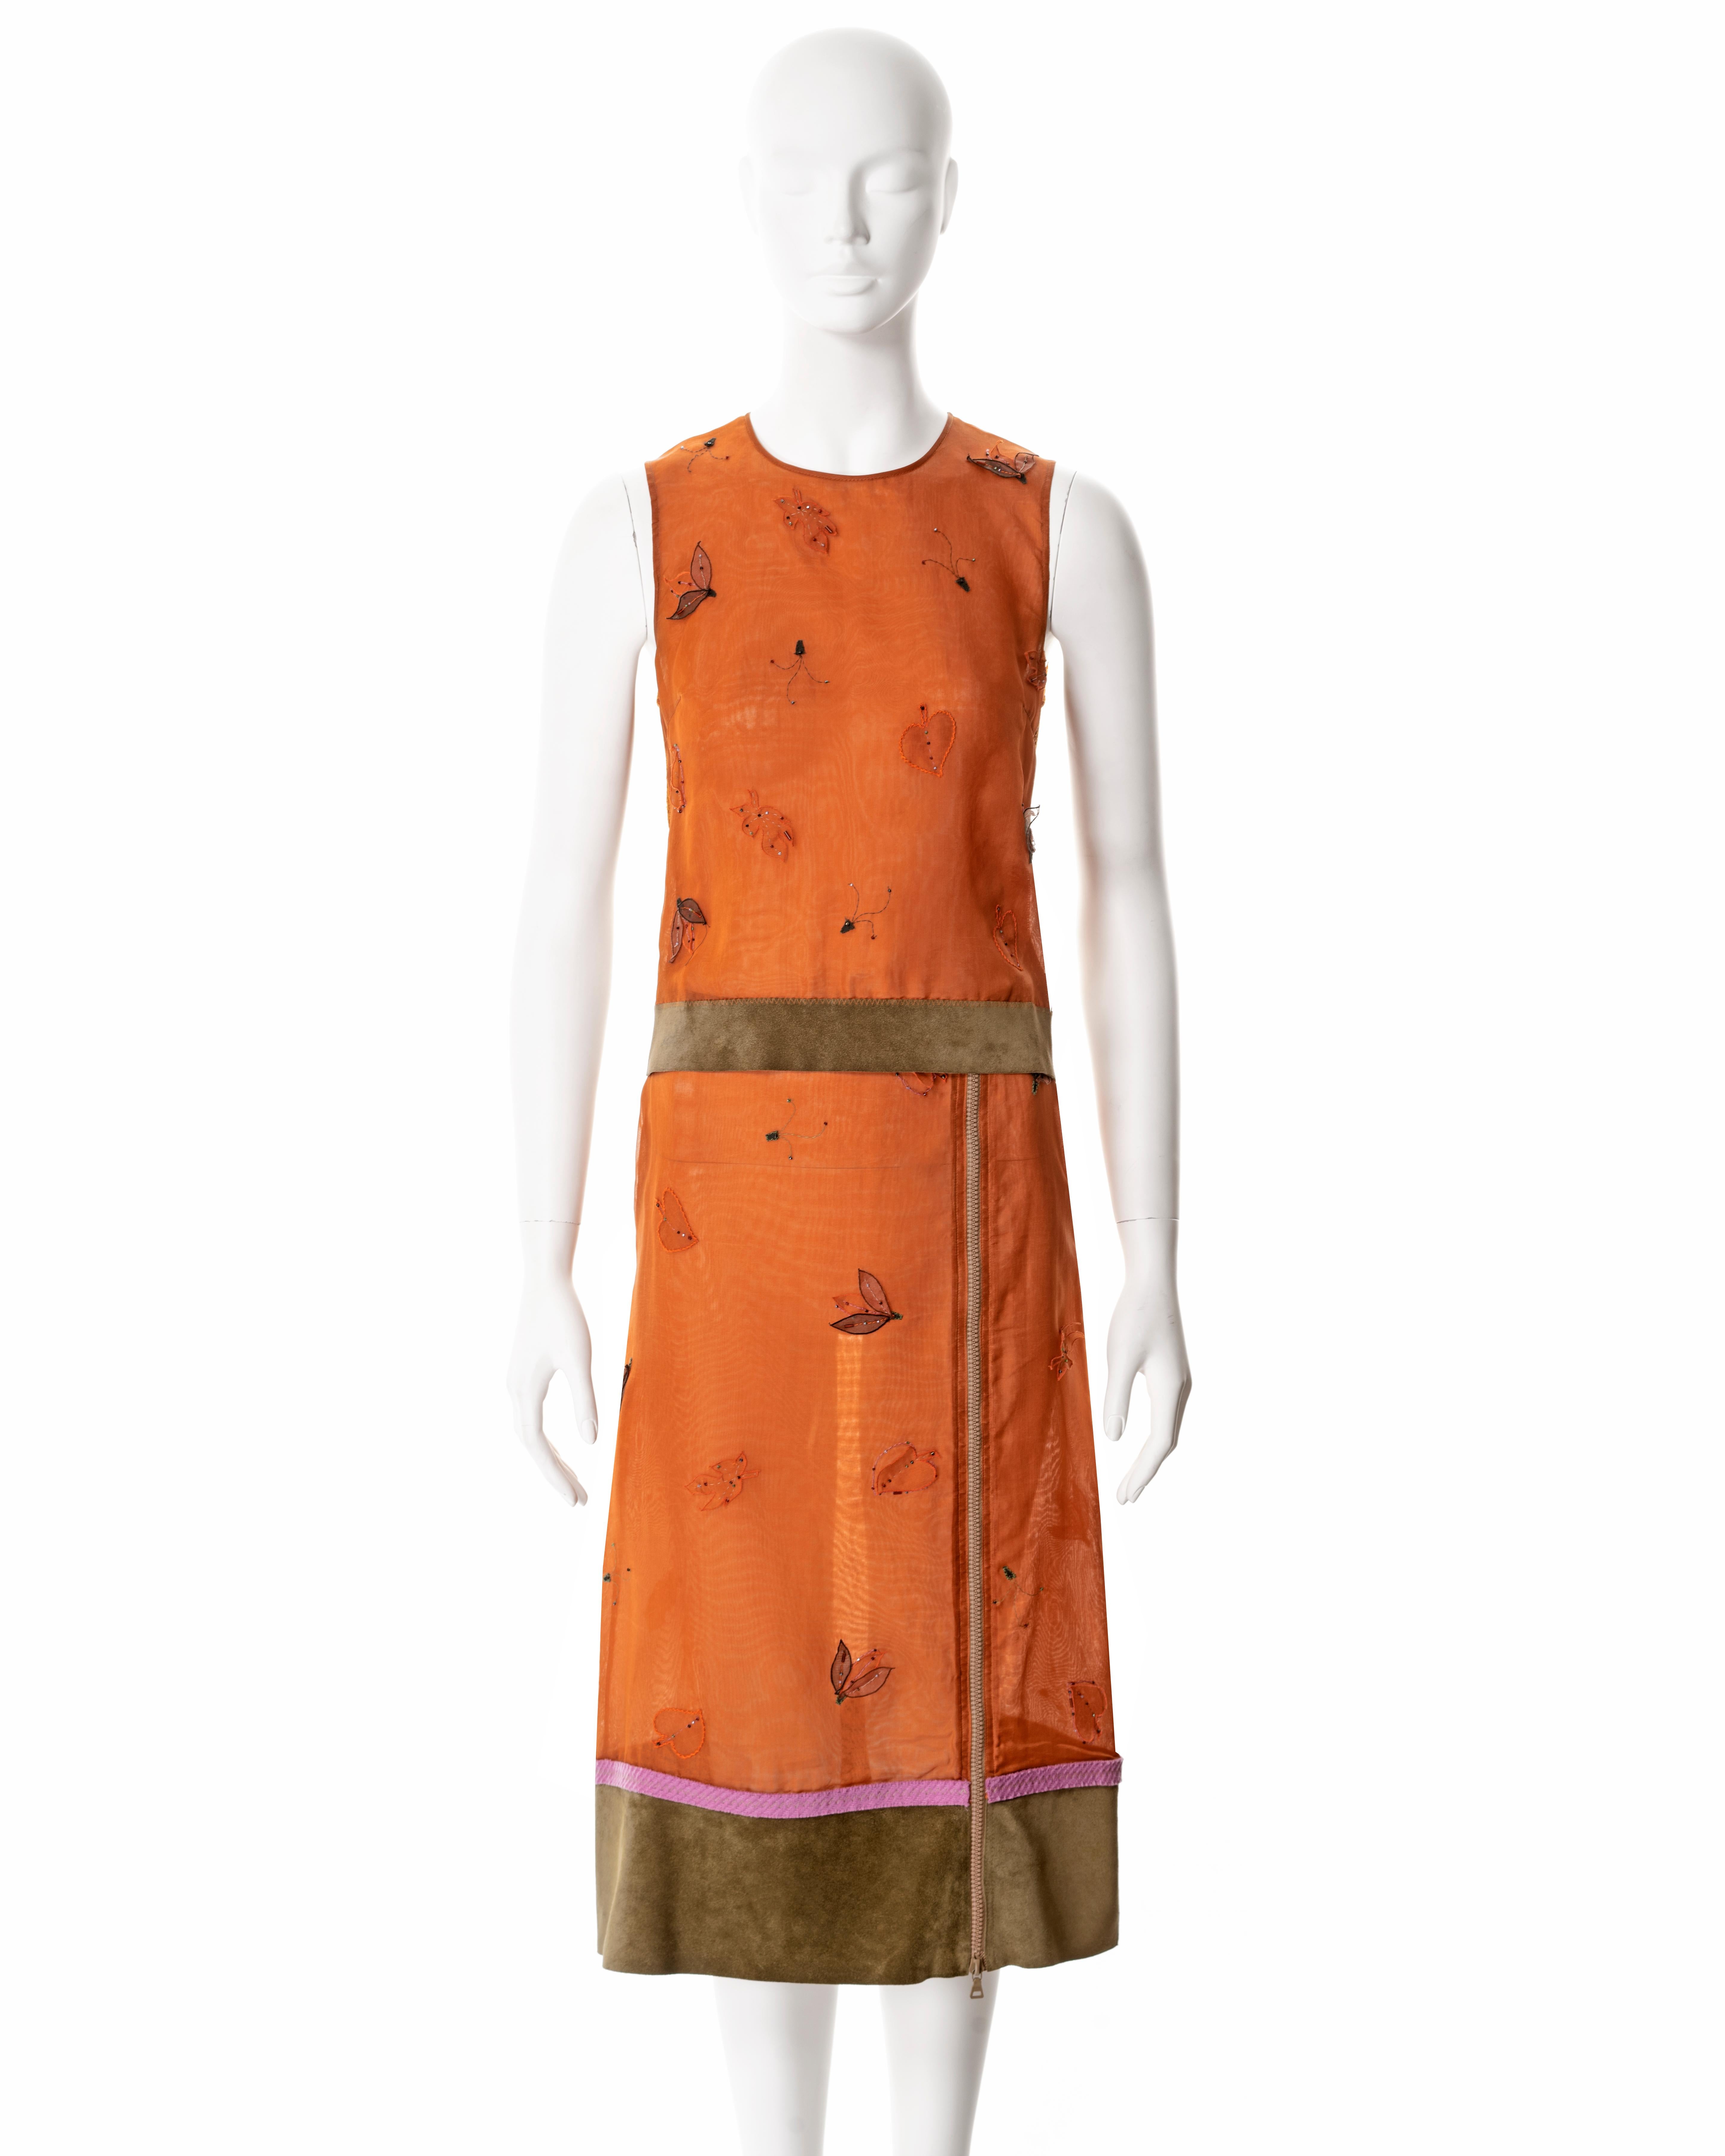 ▪ Prada 2-piece set 
▪ Creative Director: Miuccia Prada 
▪ Sold by One of a Kind Archive
▪ Fall-Winter 1999
▪ Constructed from orange silk organza 
▪ Beaded leaf-shaped organza appliques 
▪ Green suede trim 
▪ Crew-neck tank with mesh back panel 
▪